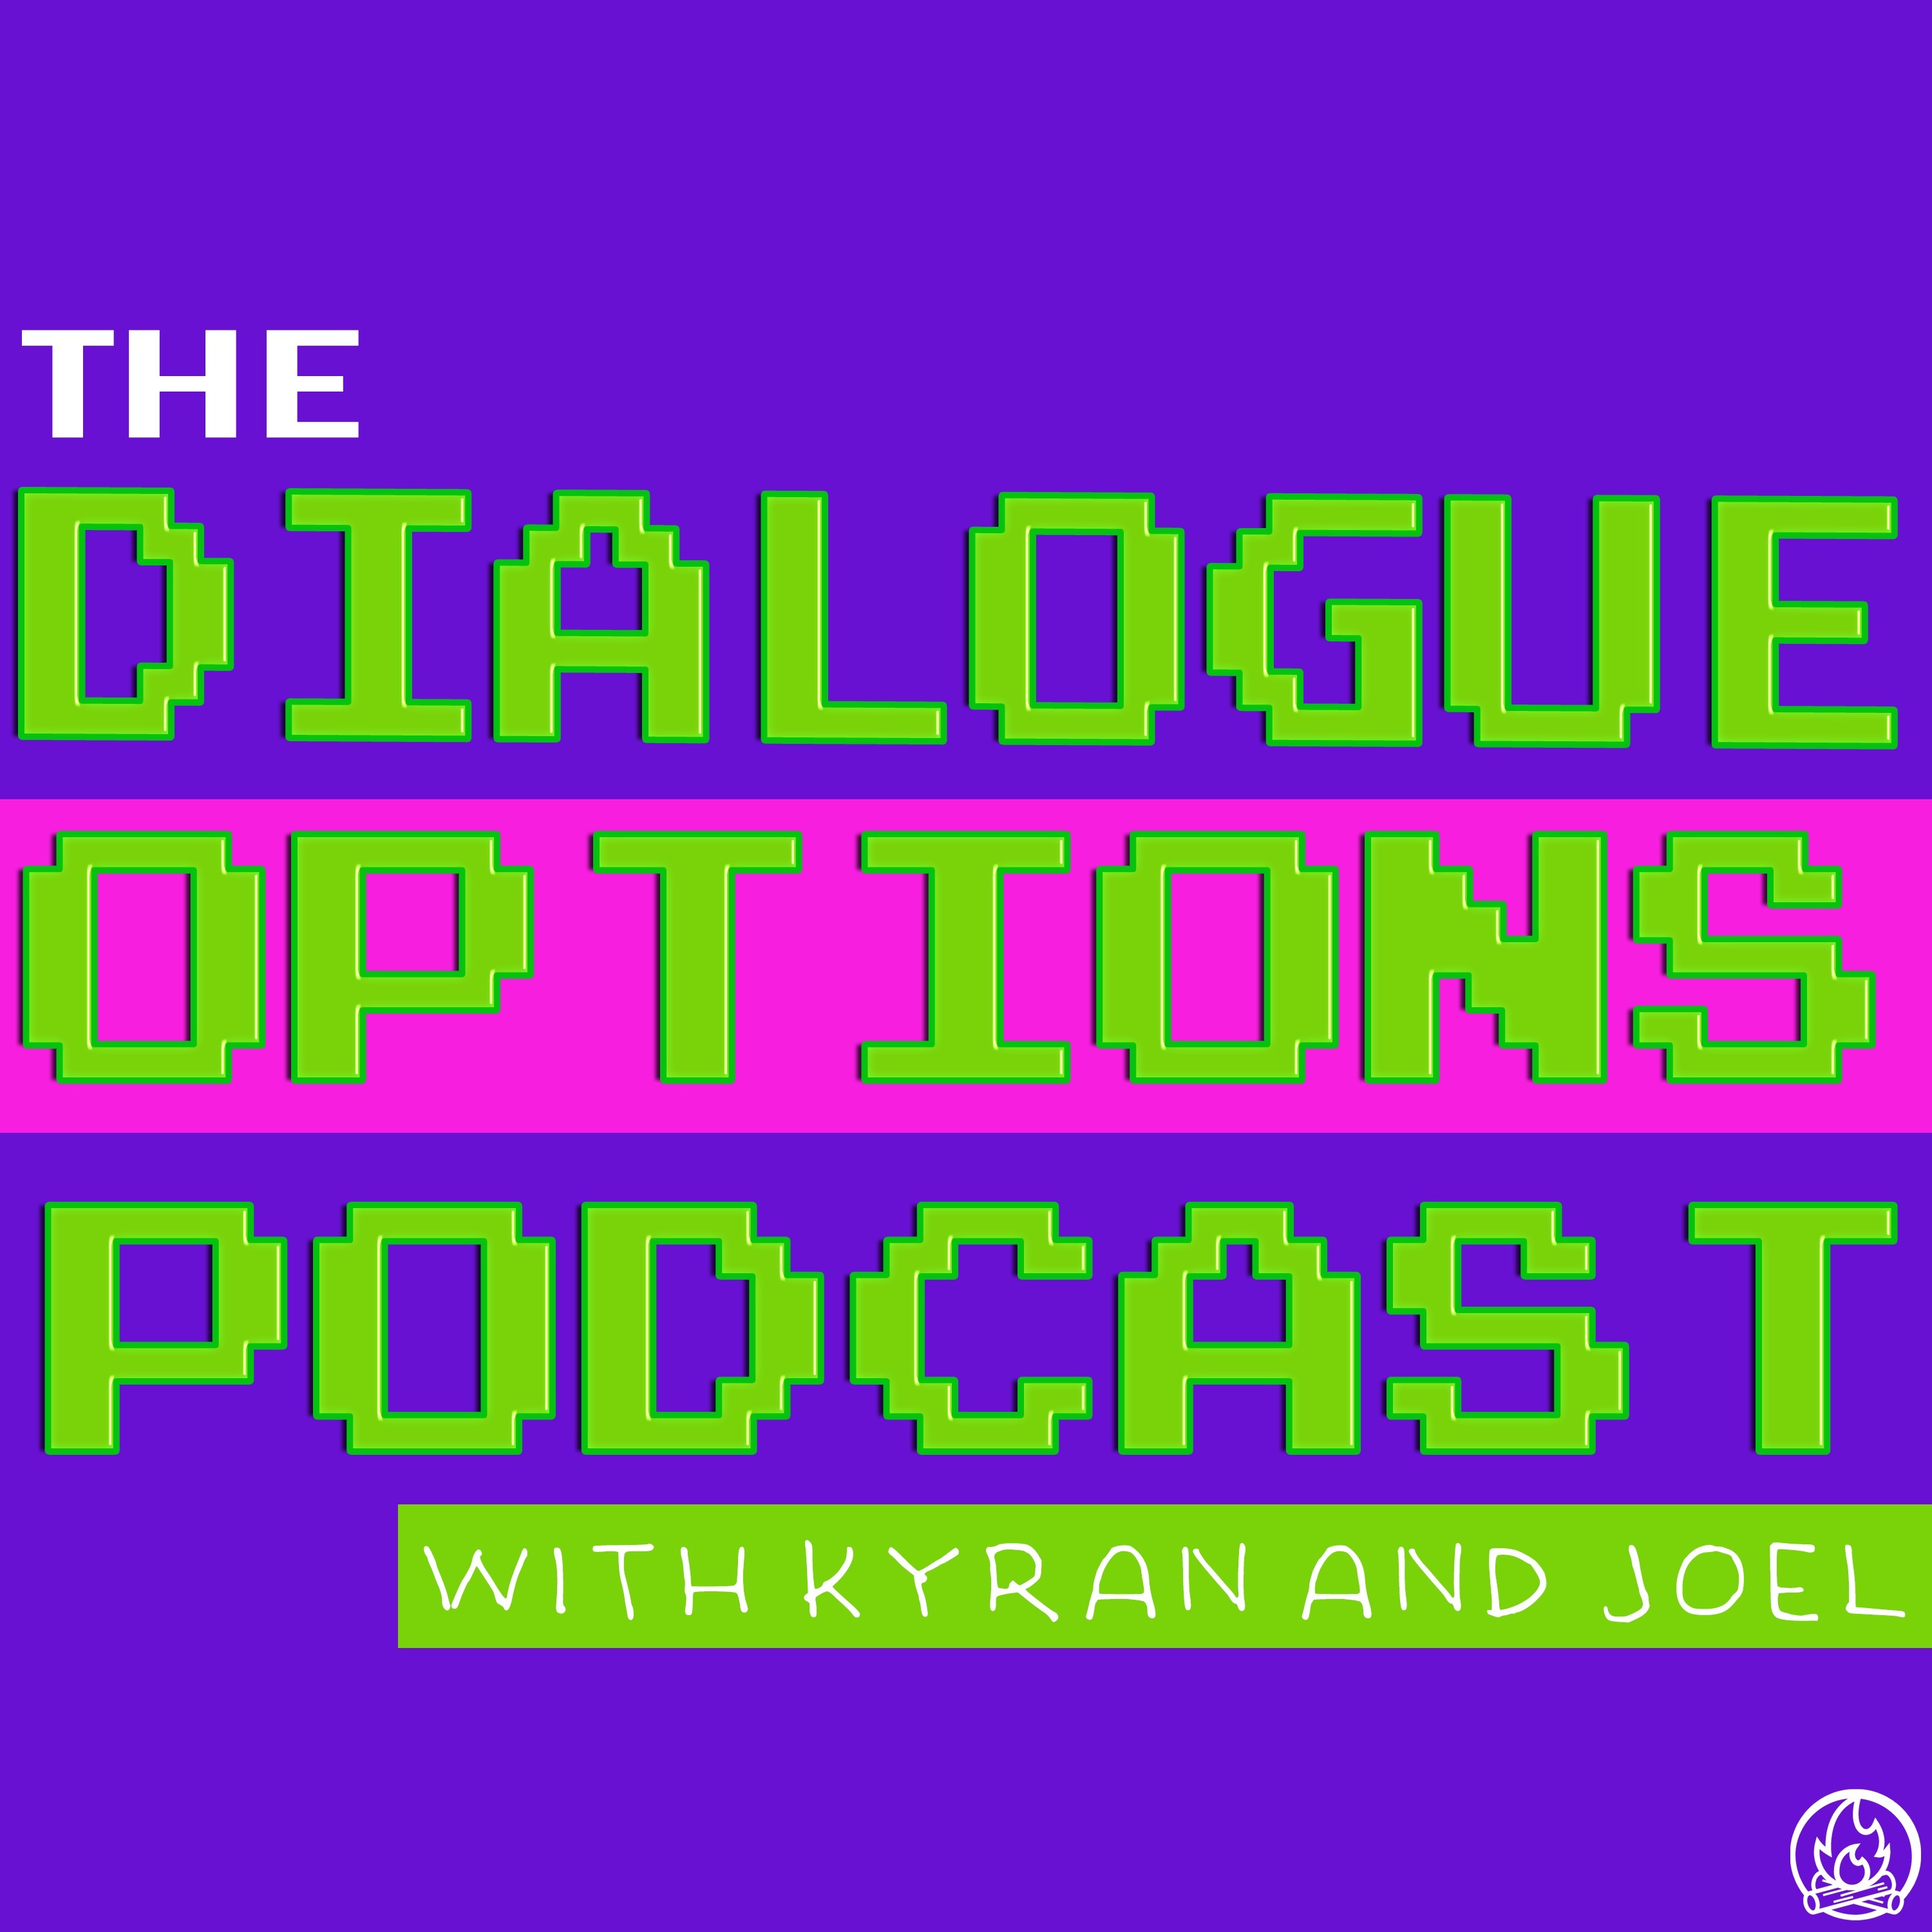 Dialogue Options Podcast Episode 258: The Game Awards Wrap Up Episode